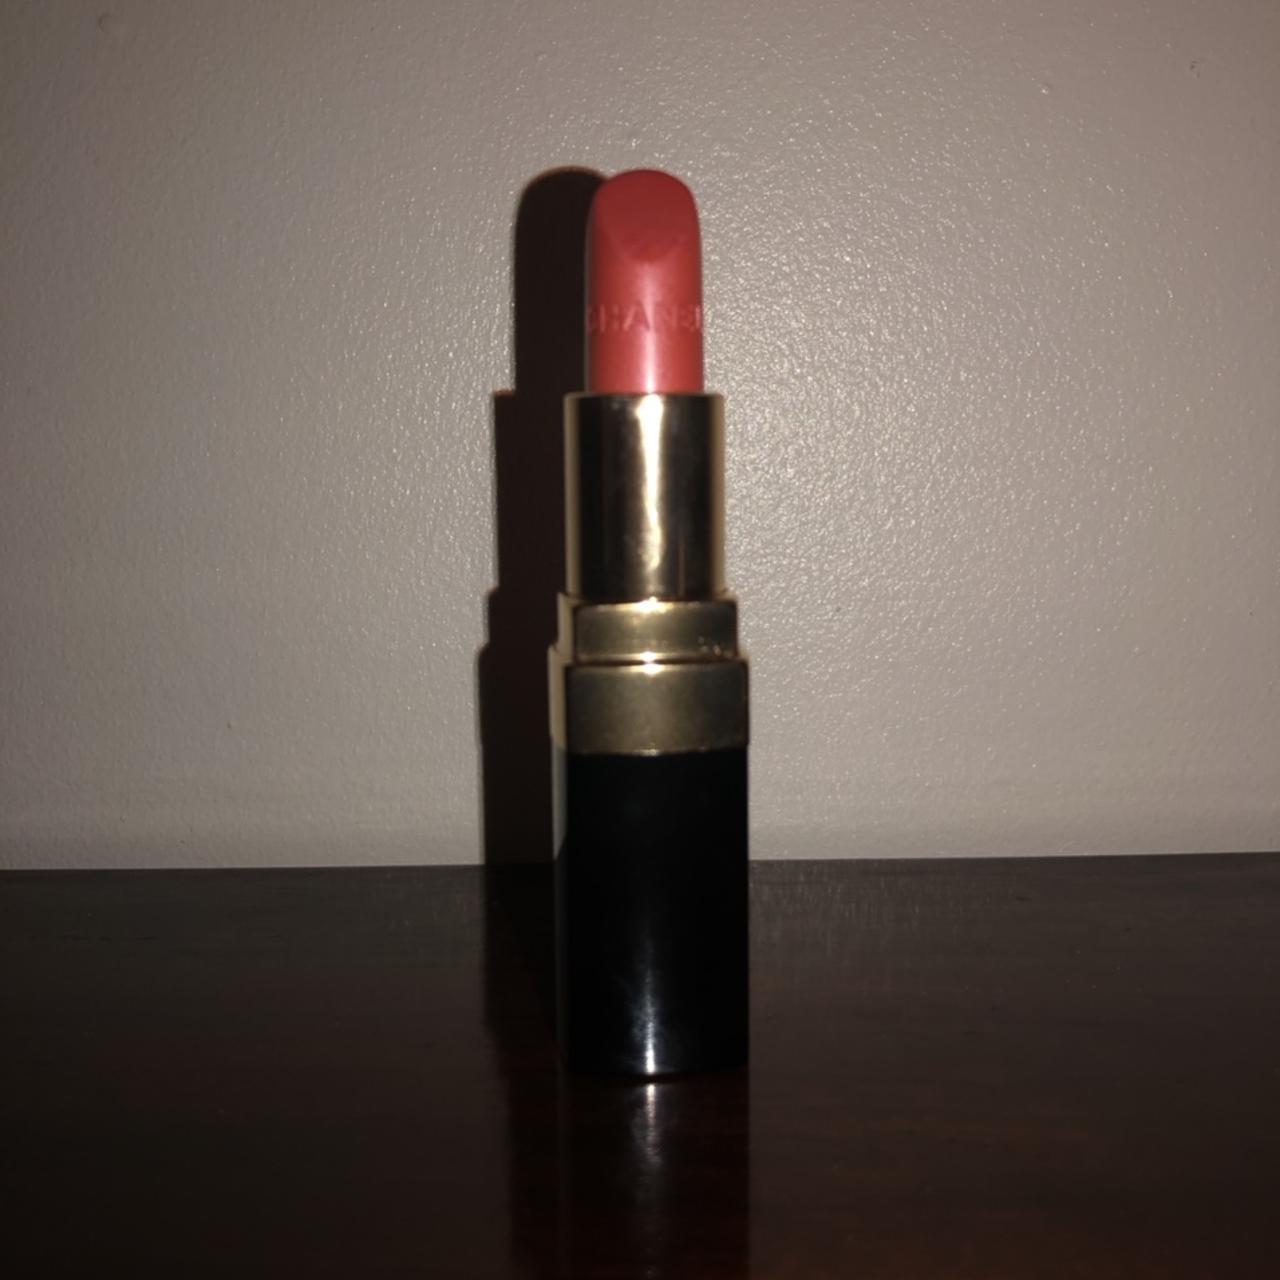 2015 reformulated Chanel Rouge Coco lipsticks